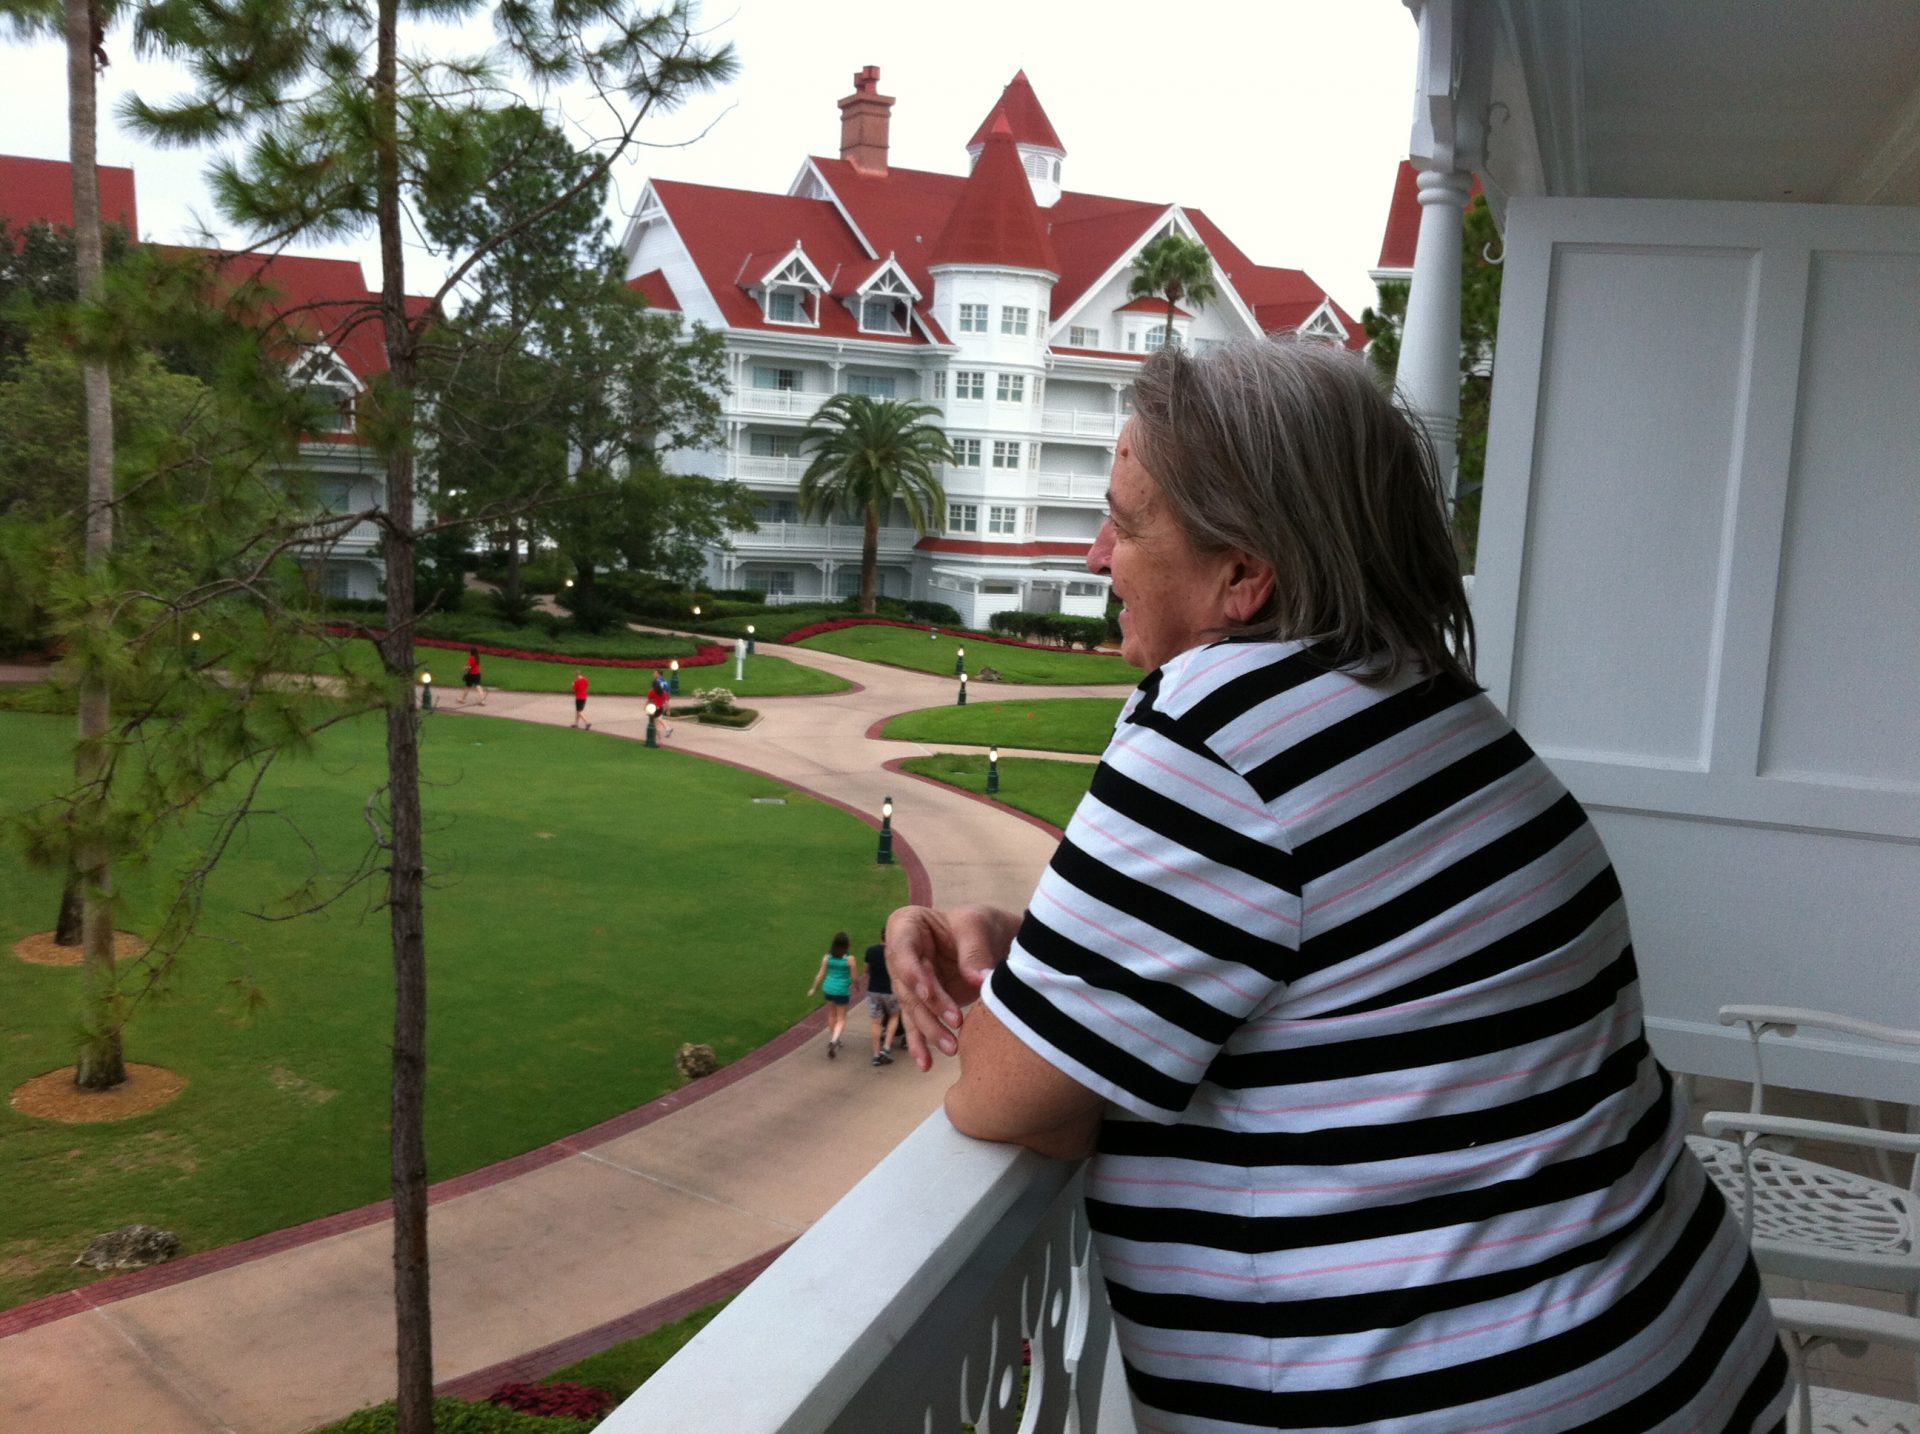 Grammy at the Grand Floridian